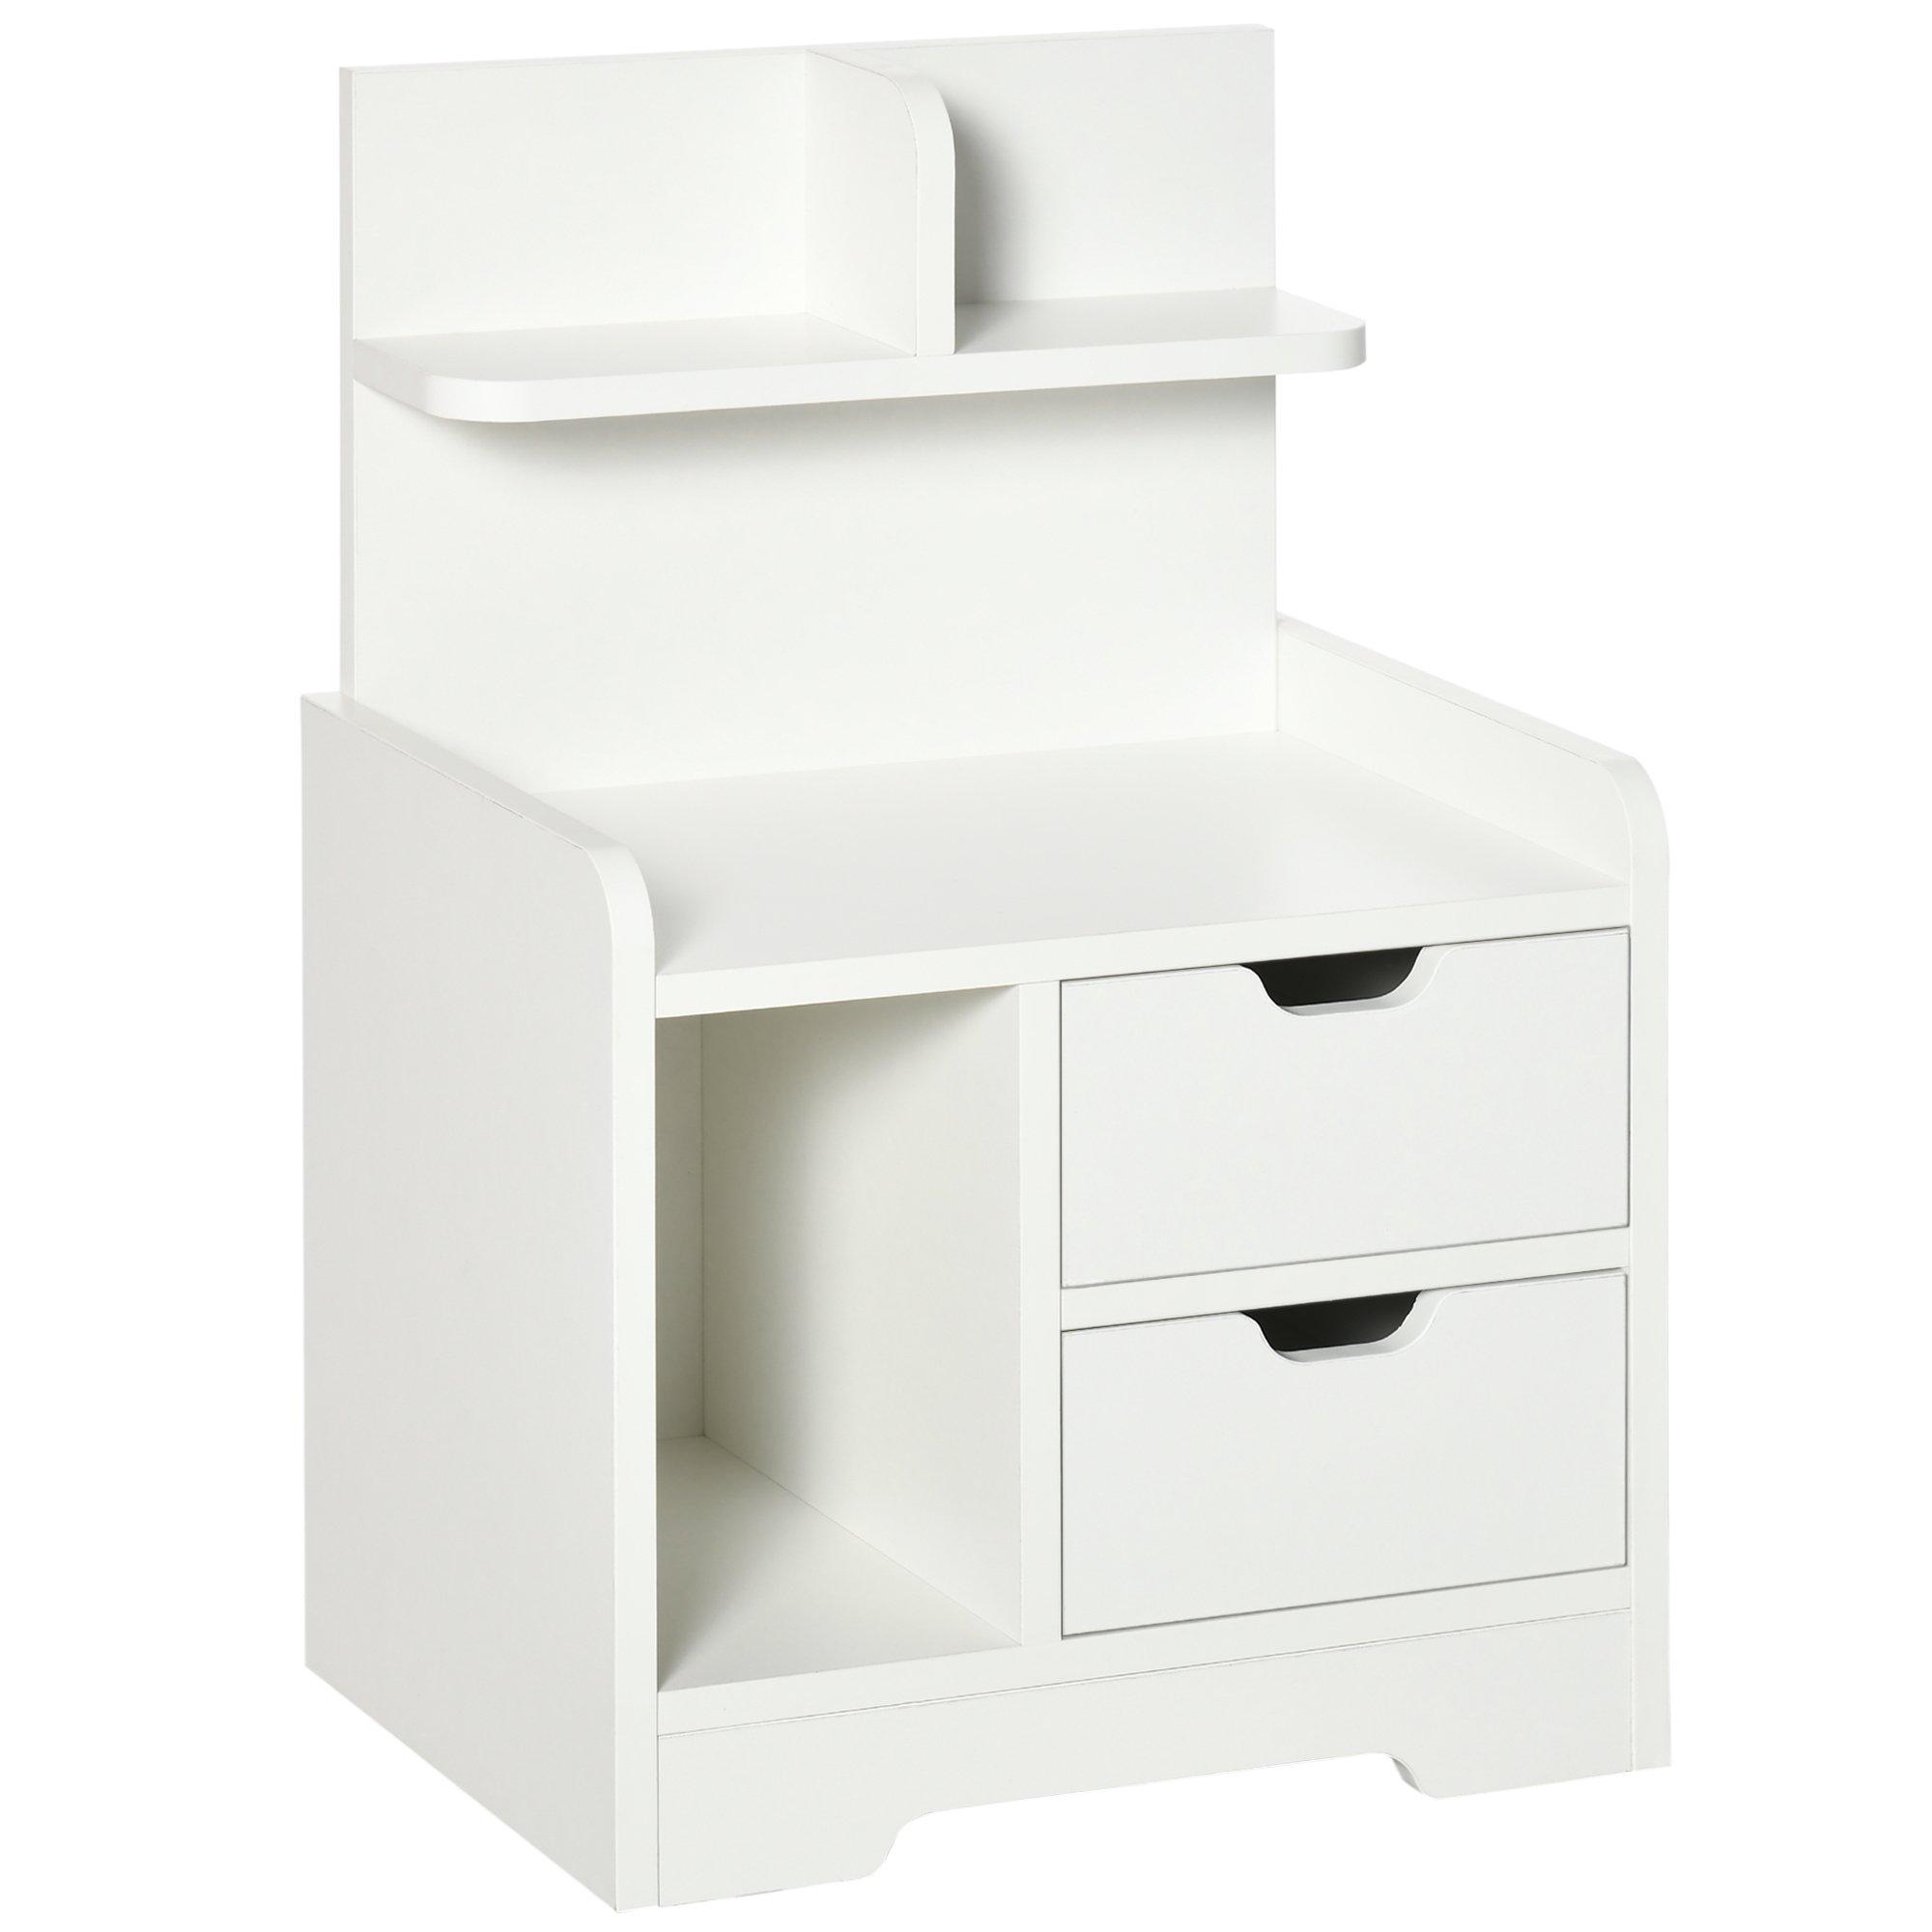 Bedside Table with 2 Drawers and Shelves Storage Organiser Bedroom